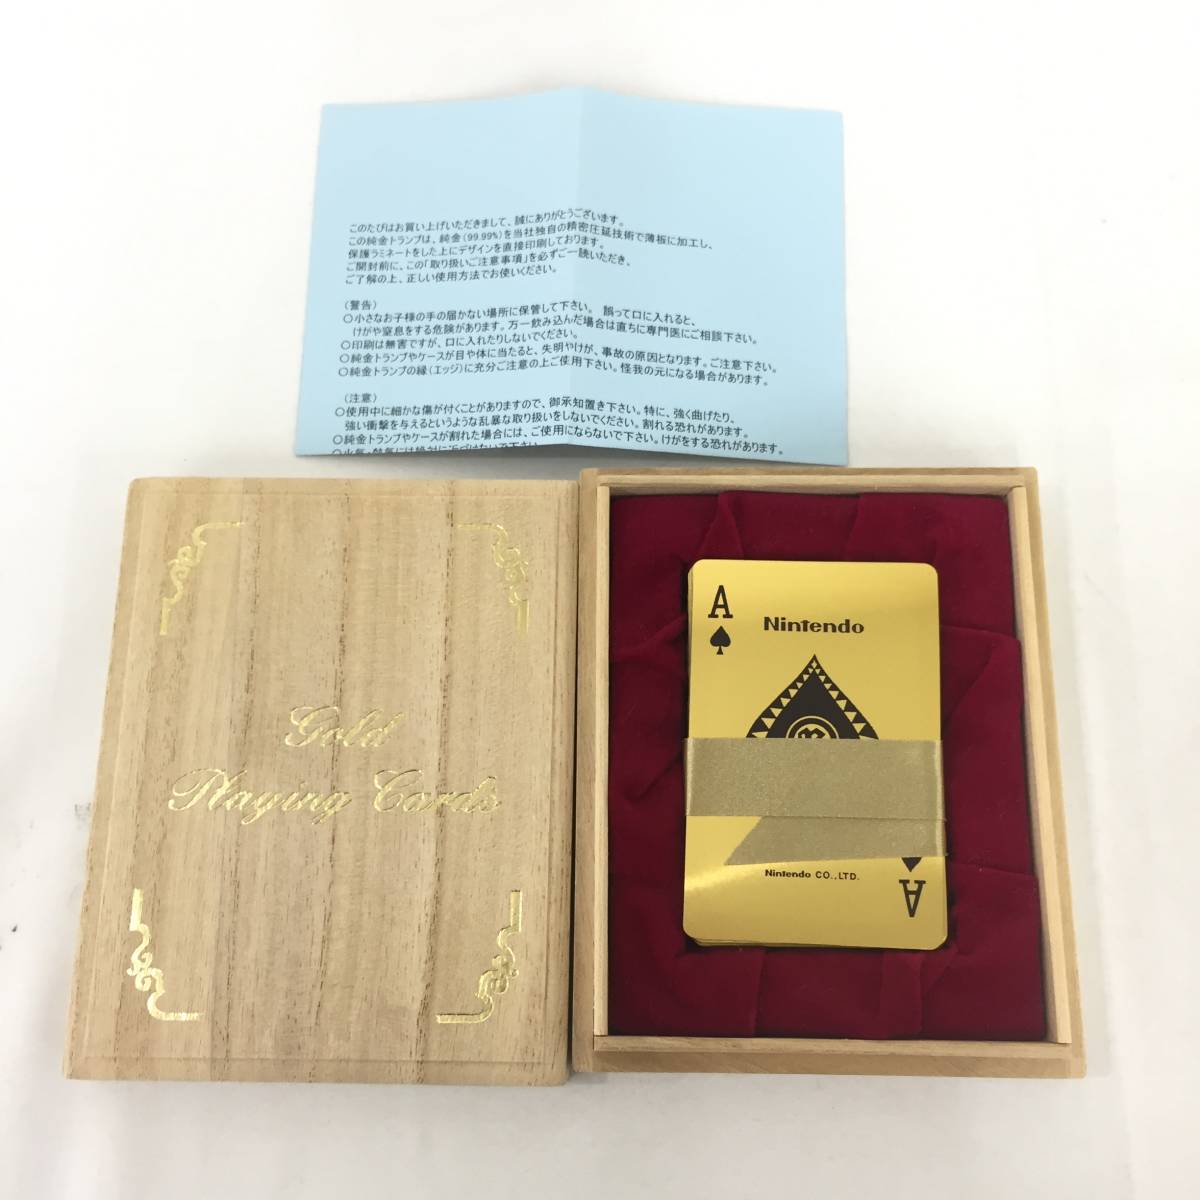 Somebody got a good deal today. These Nintendo playing cards made with pure gold just sold for 234,333 yen (~ US$2000 / EUR1800). They contain close to 40 grams of gold, which is worth more?!